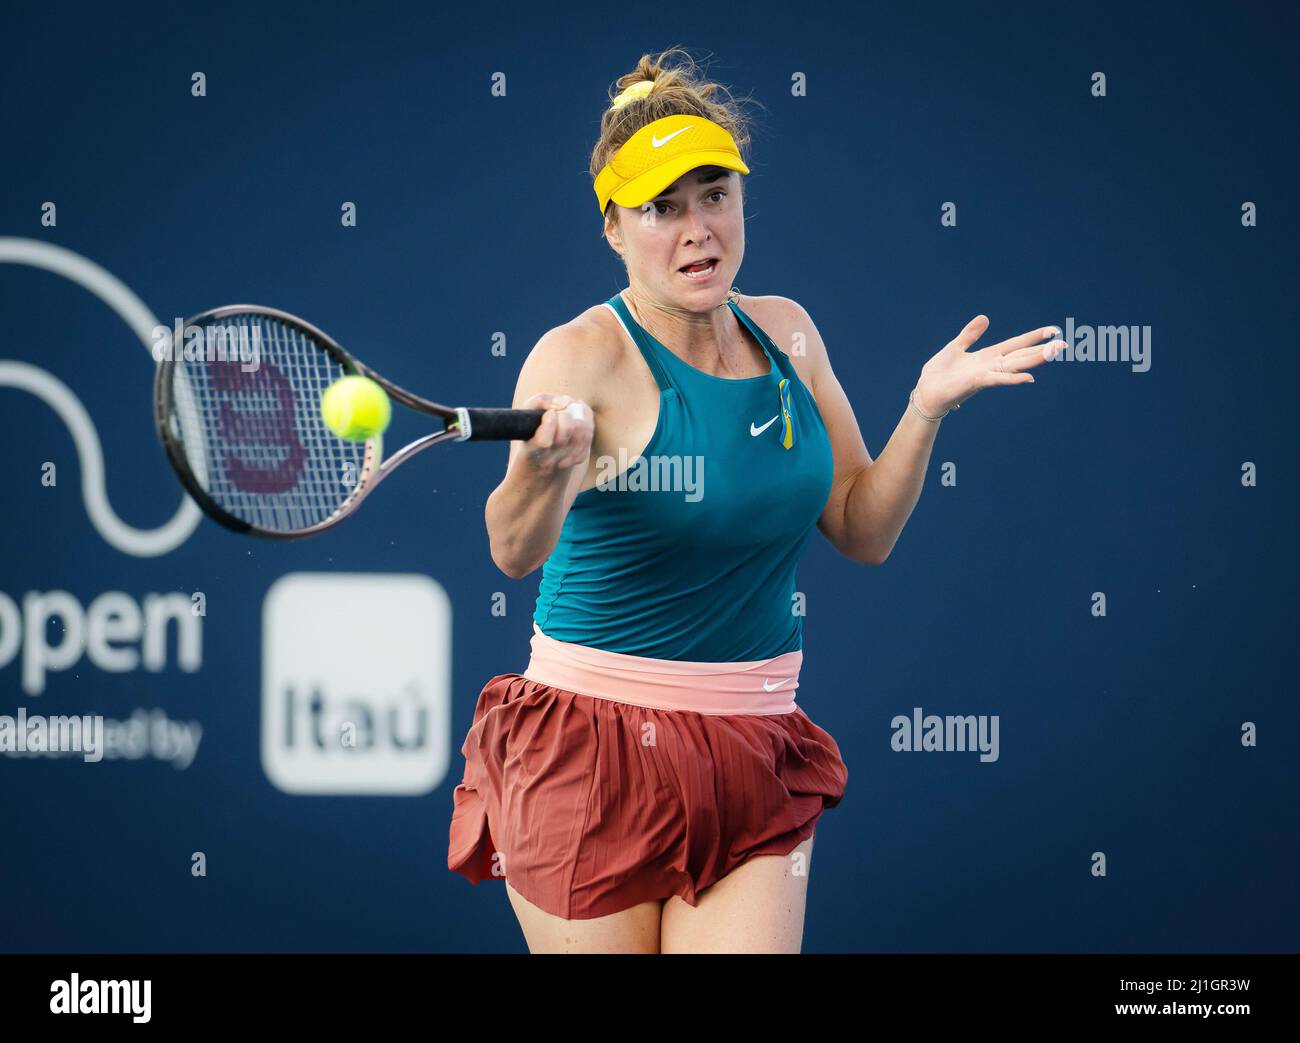 Elina Svitolina of Ukraine in action against Heather Watson of Great  Britain during the second round of the 2022 Miami Open, WTA Masters 1000  tennis tournament on March 24, 2022 at Hard